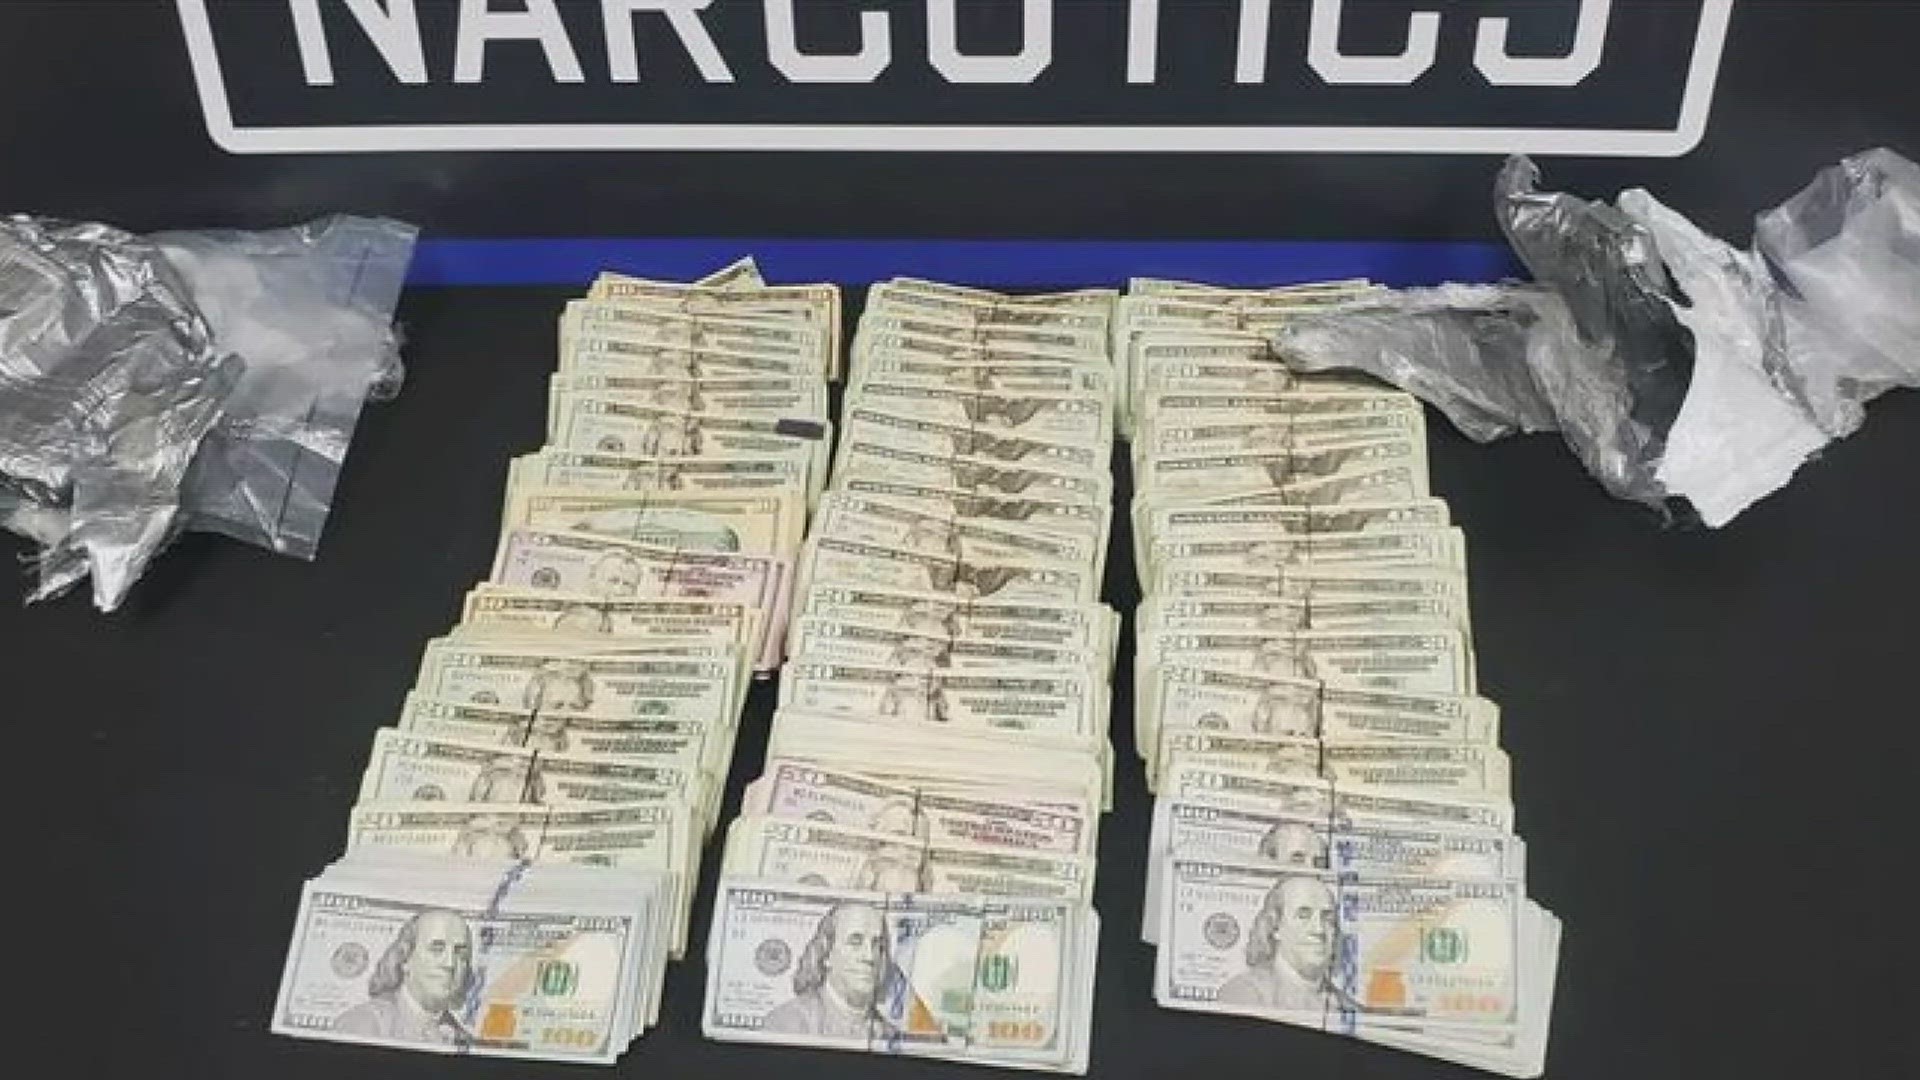 Law enforcement officers say confiscating suspicious funds is necessary to keep citizens safe.